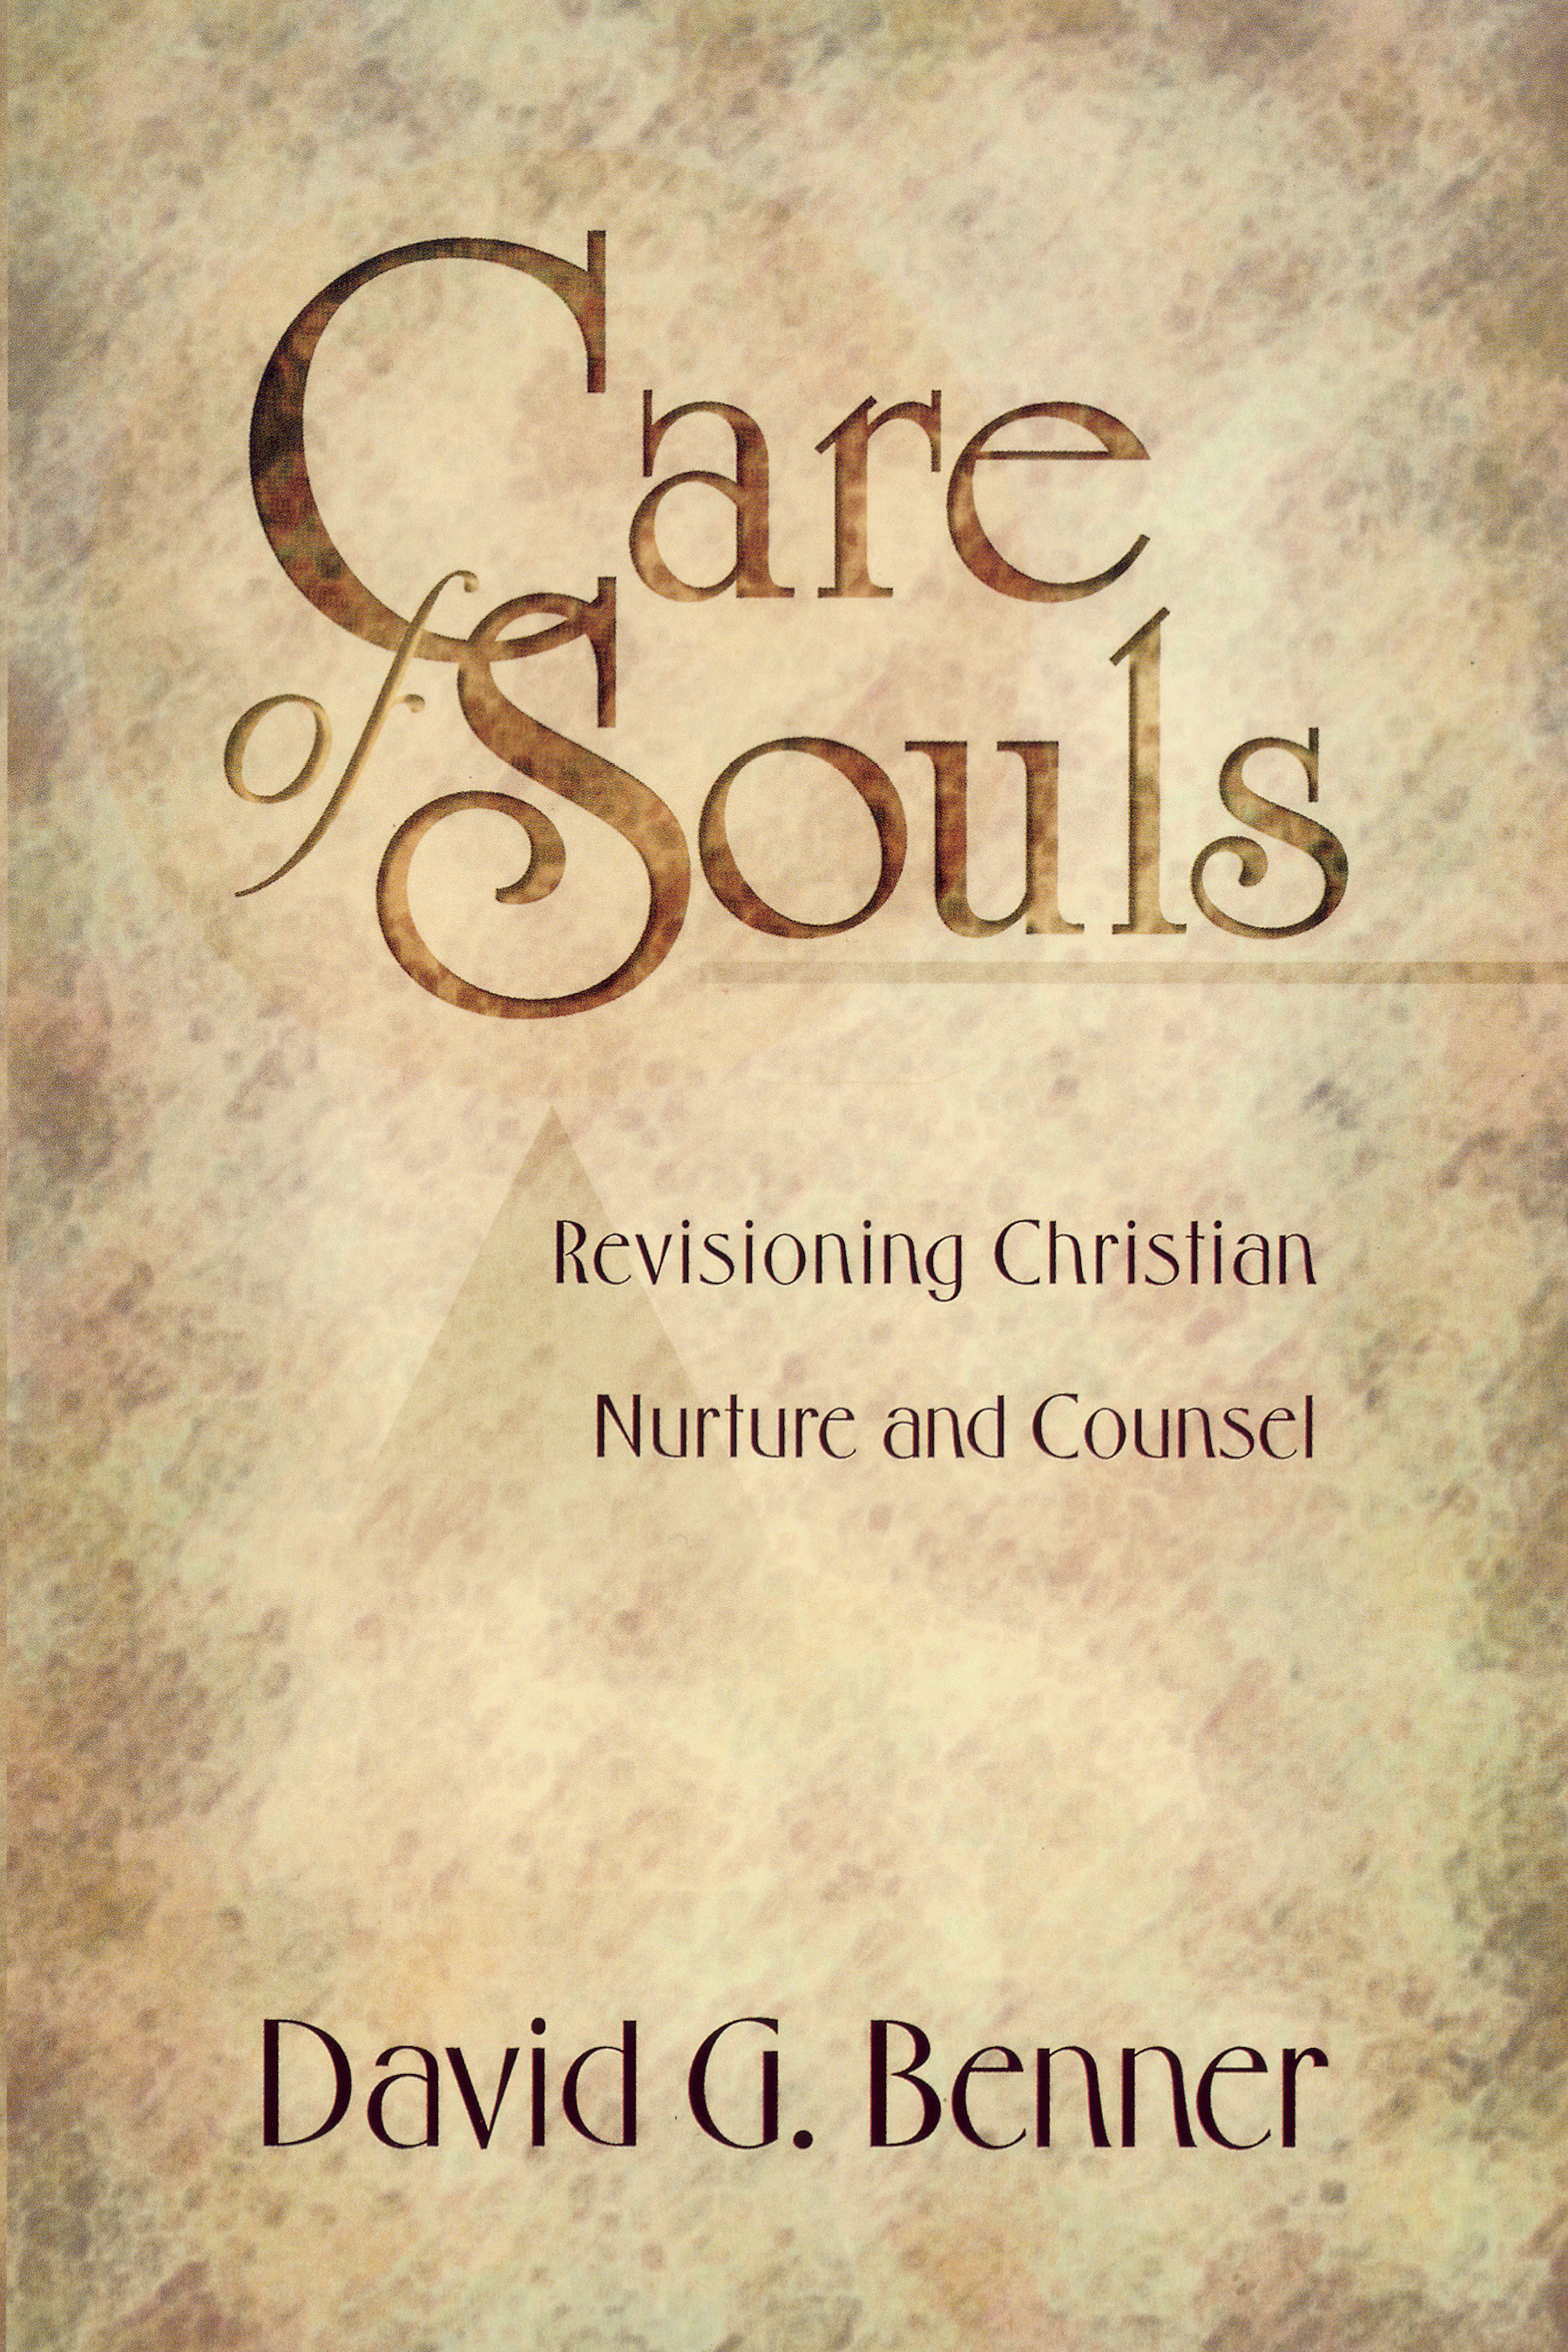 Care of Souls Revisioning Christian Nurture and Counsel